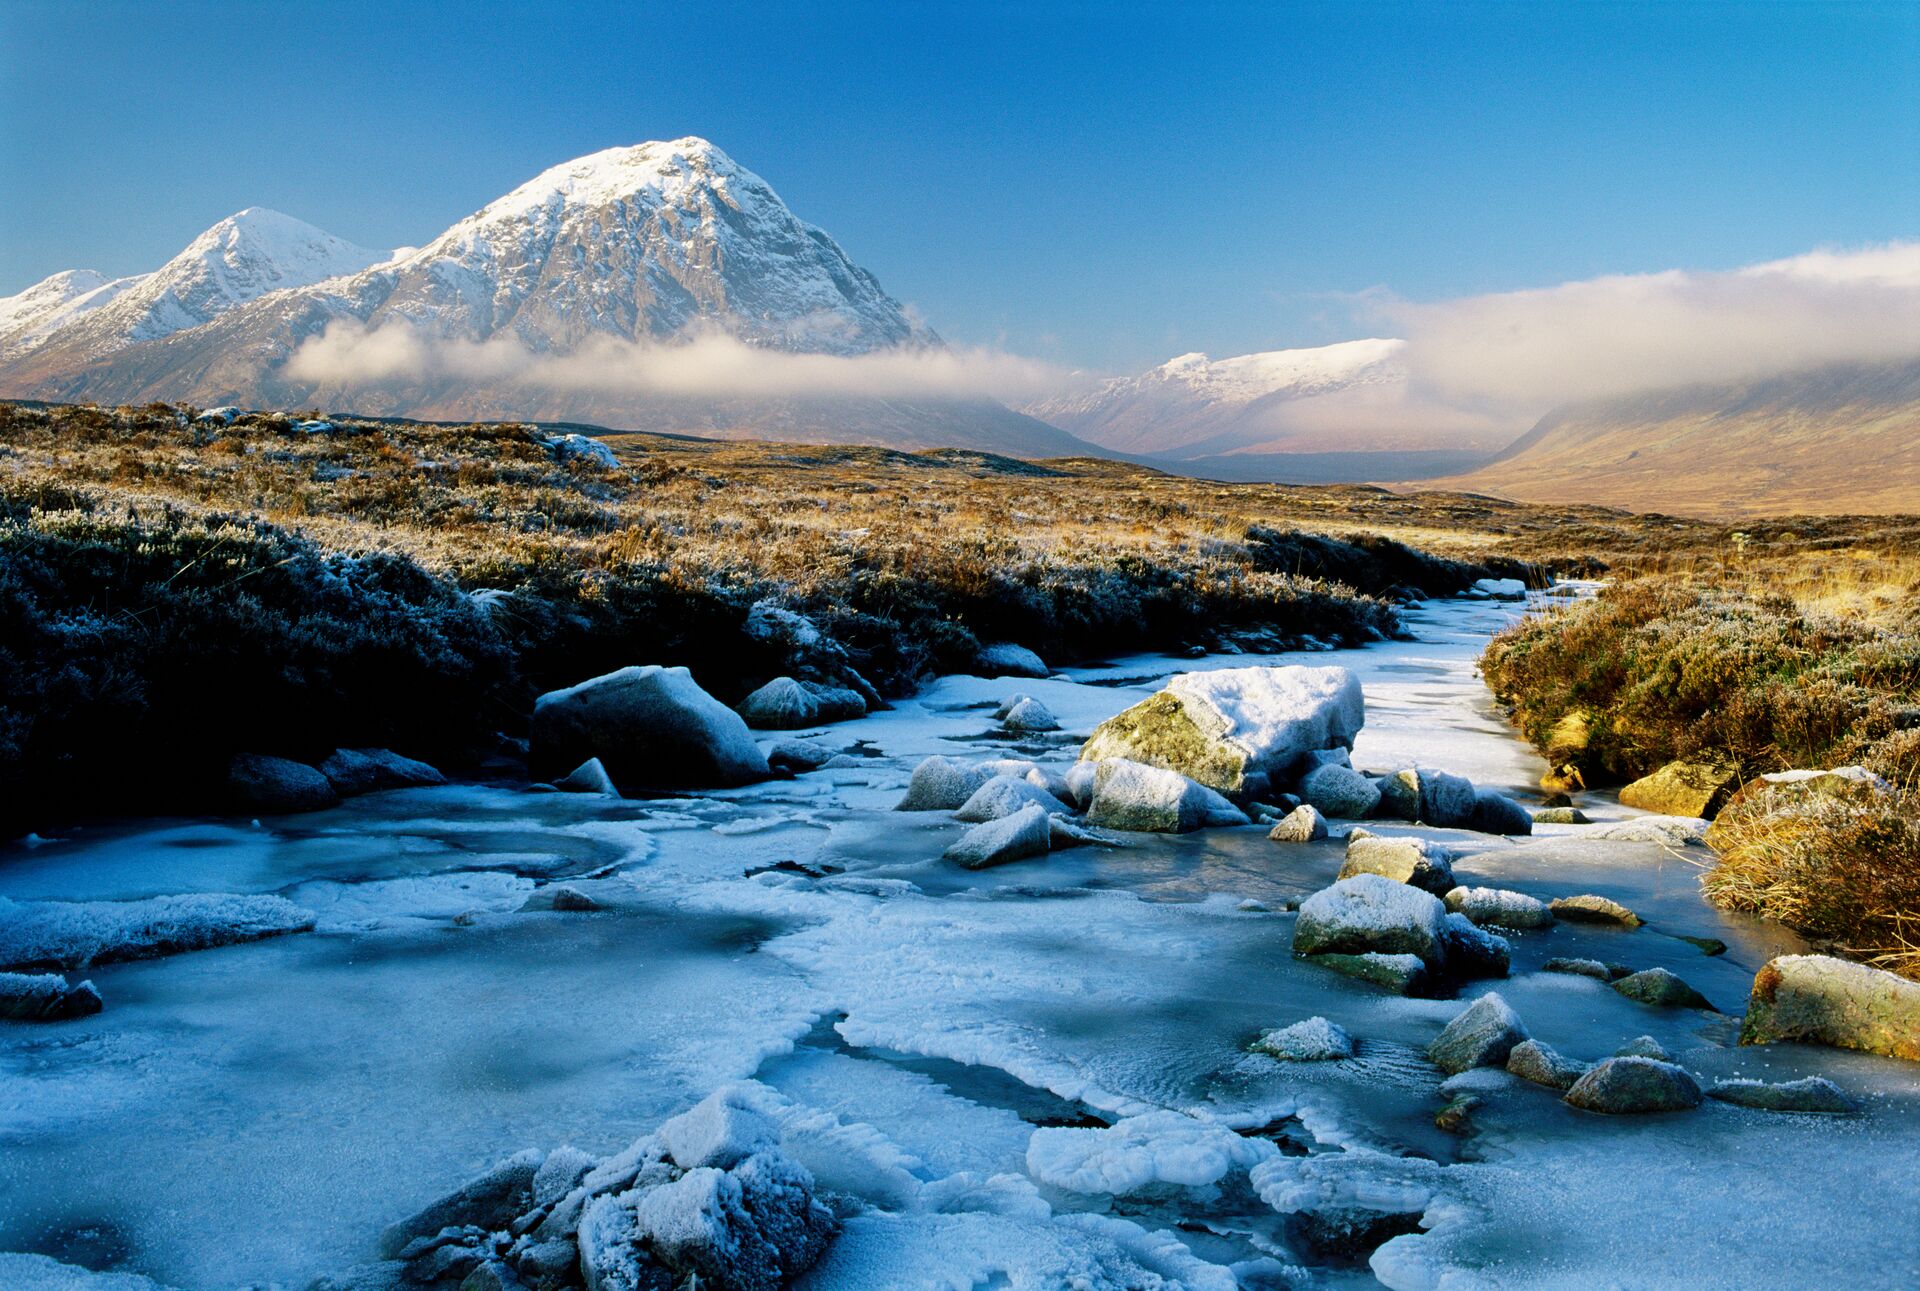 A snow capped mountain stands in the background, with an icy river flowing in the front